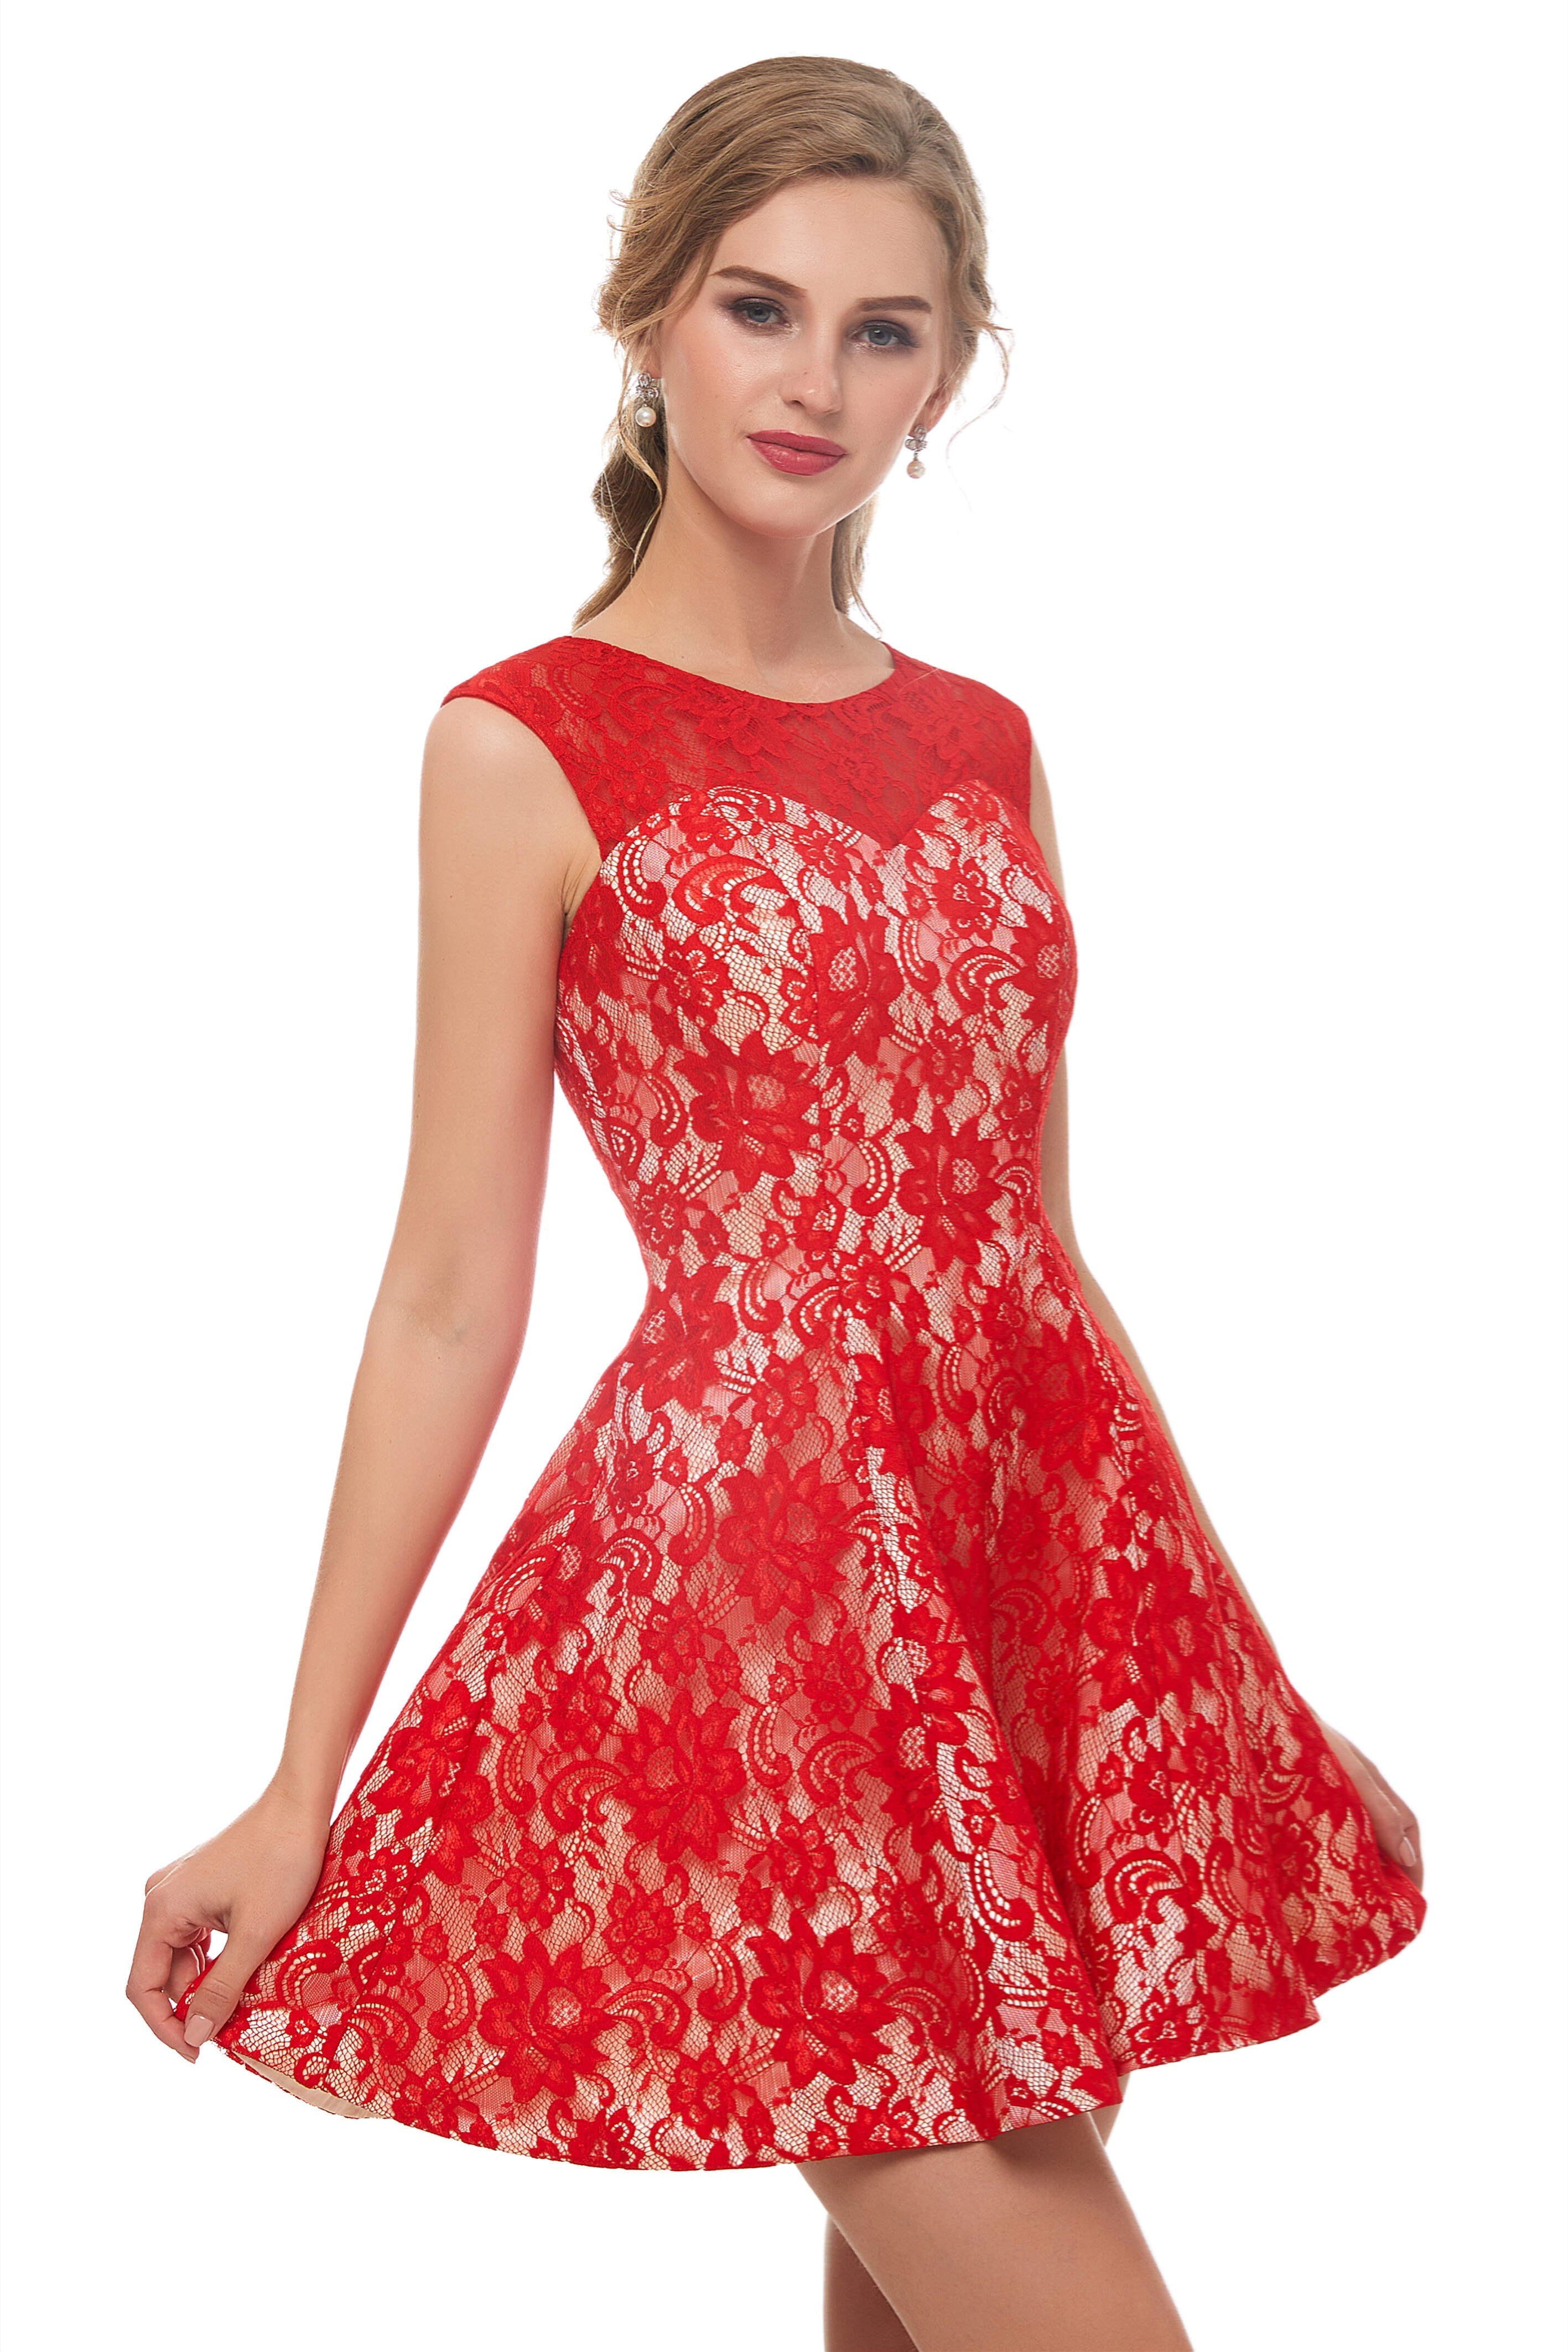 A-Line Red Lace Sleeveless Mini Corset Homecoming Dresses outfit, Evening Dress Knee Length